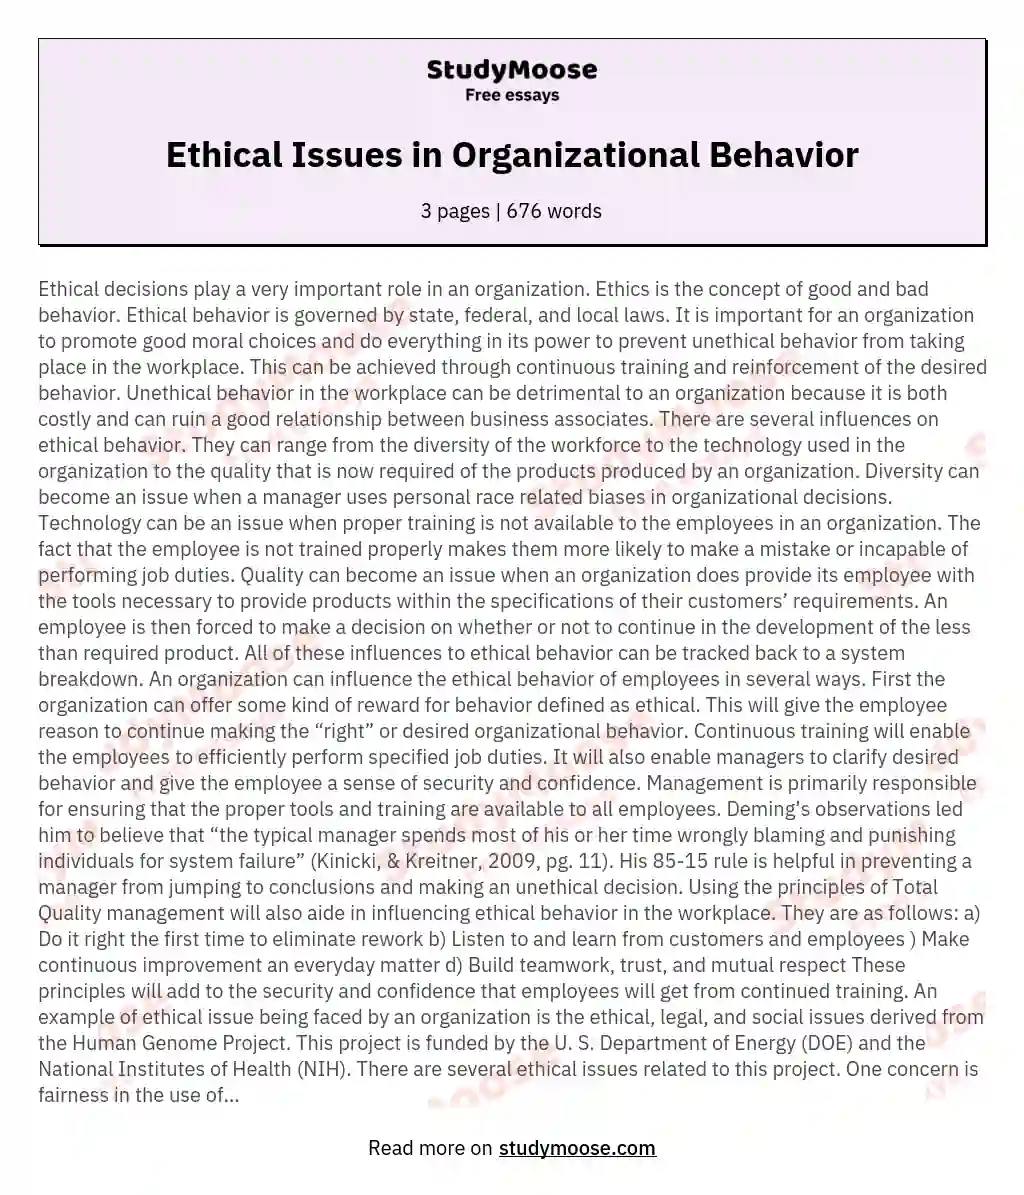 Ethical Issues in Organizational Behavior essay